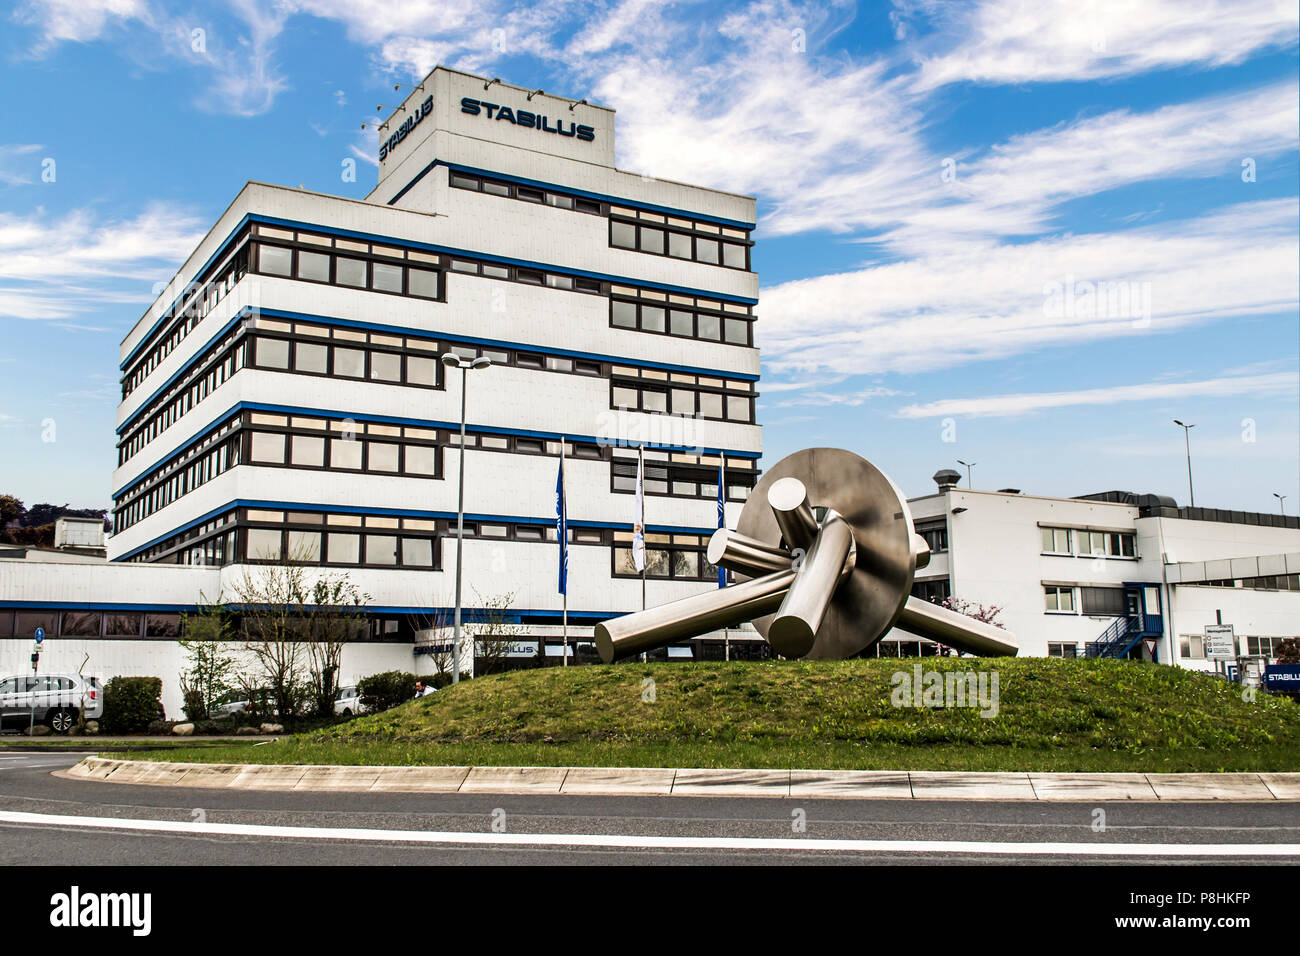 Koblenz, Germany 09.07.2017: view of the Stabilus headquarter and factory in Koblenz. You can also see factory buildings Stock Photo